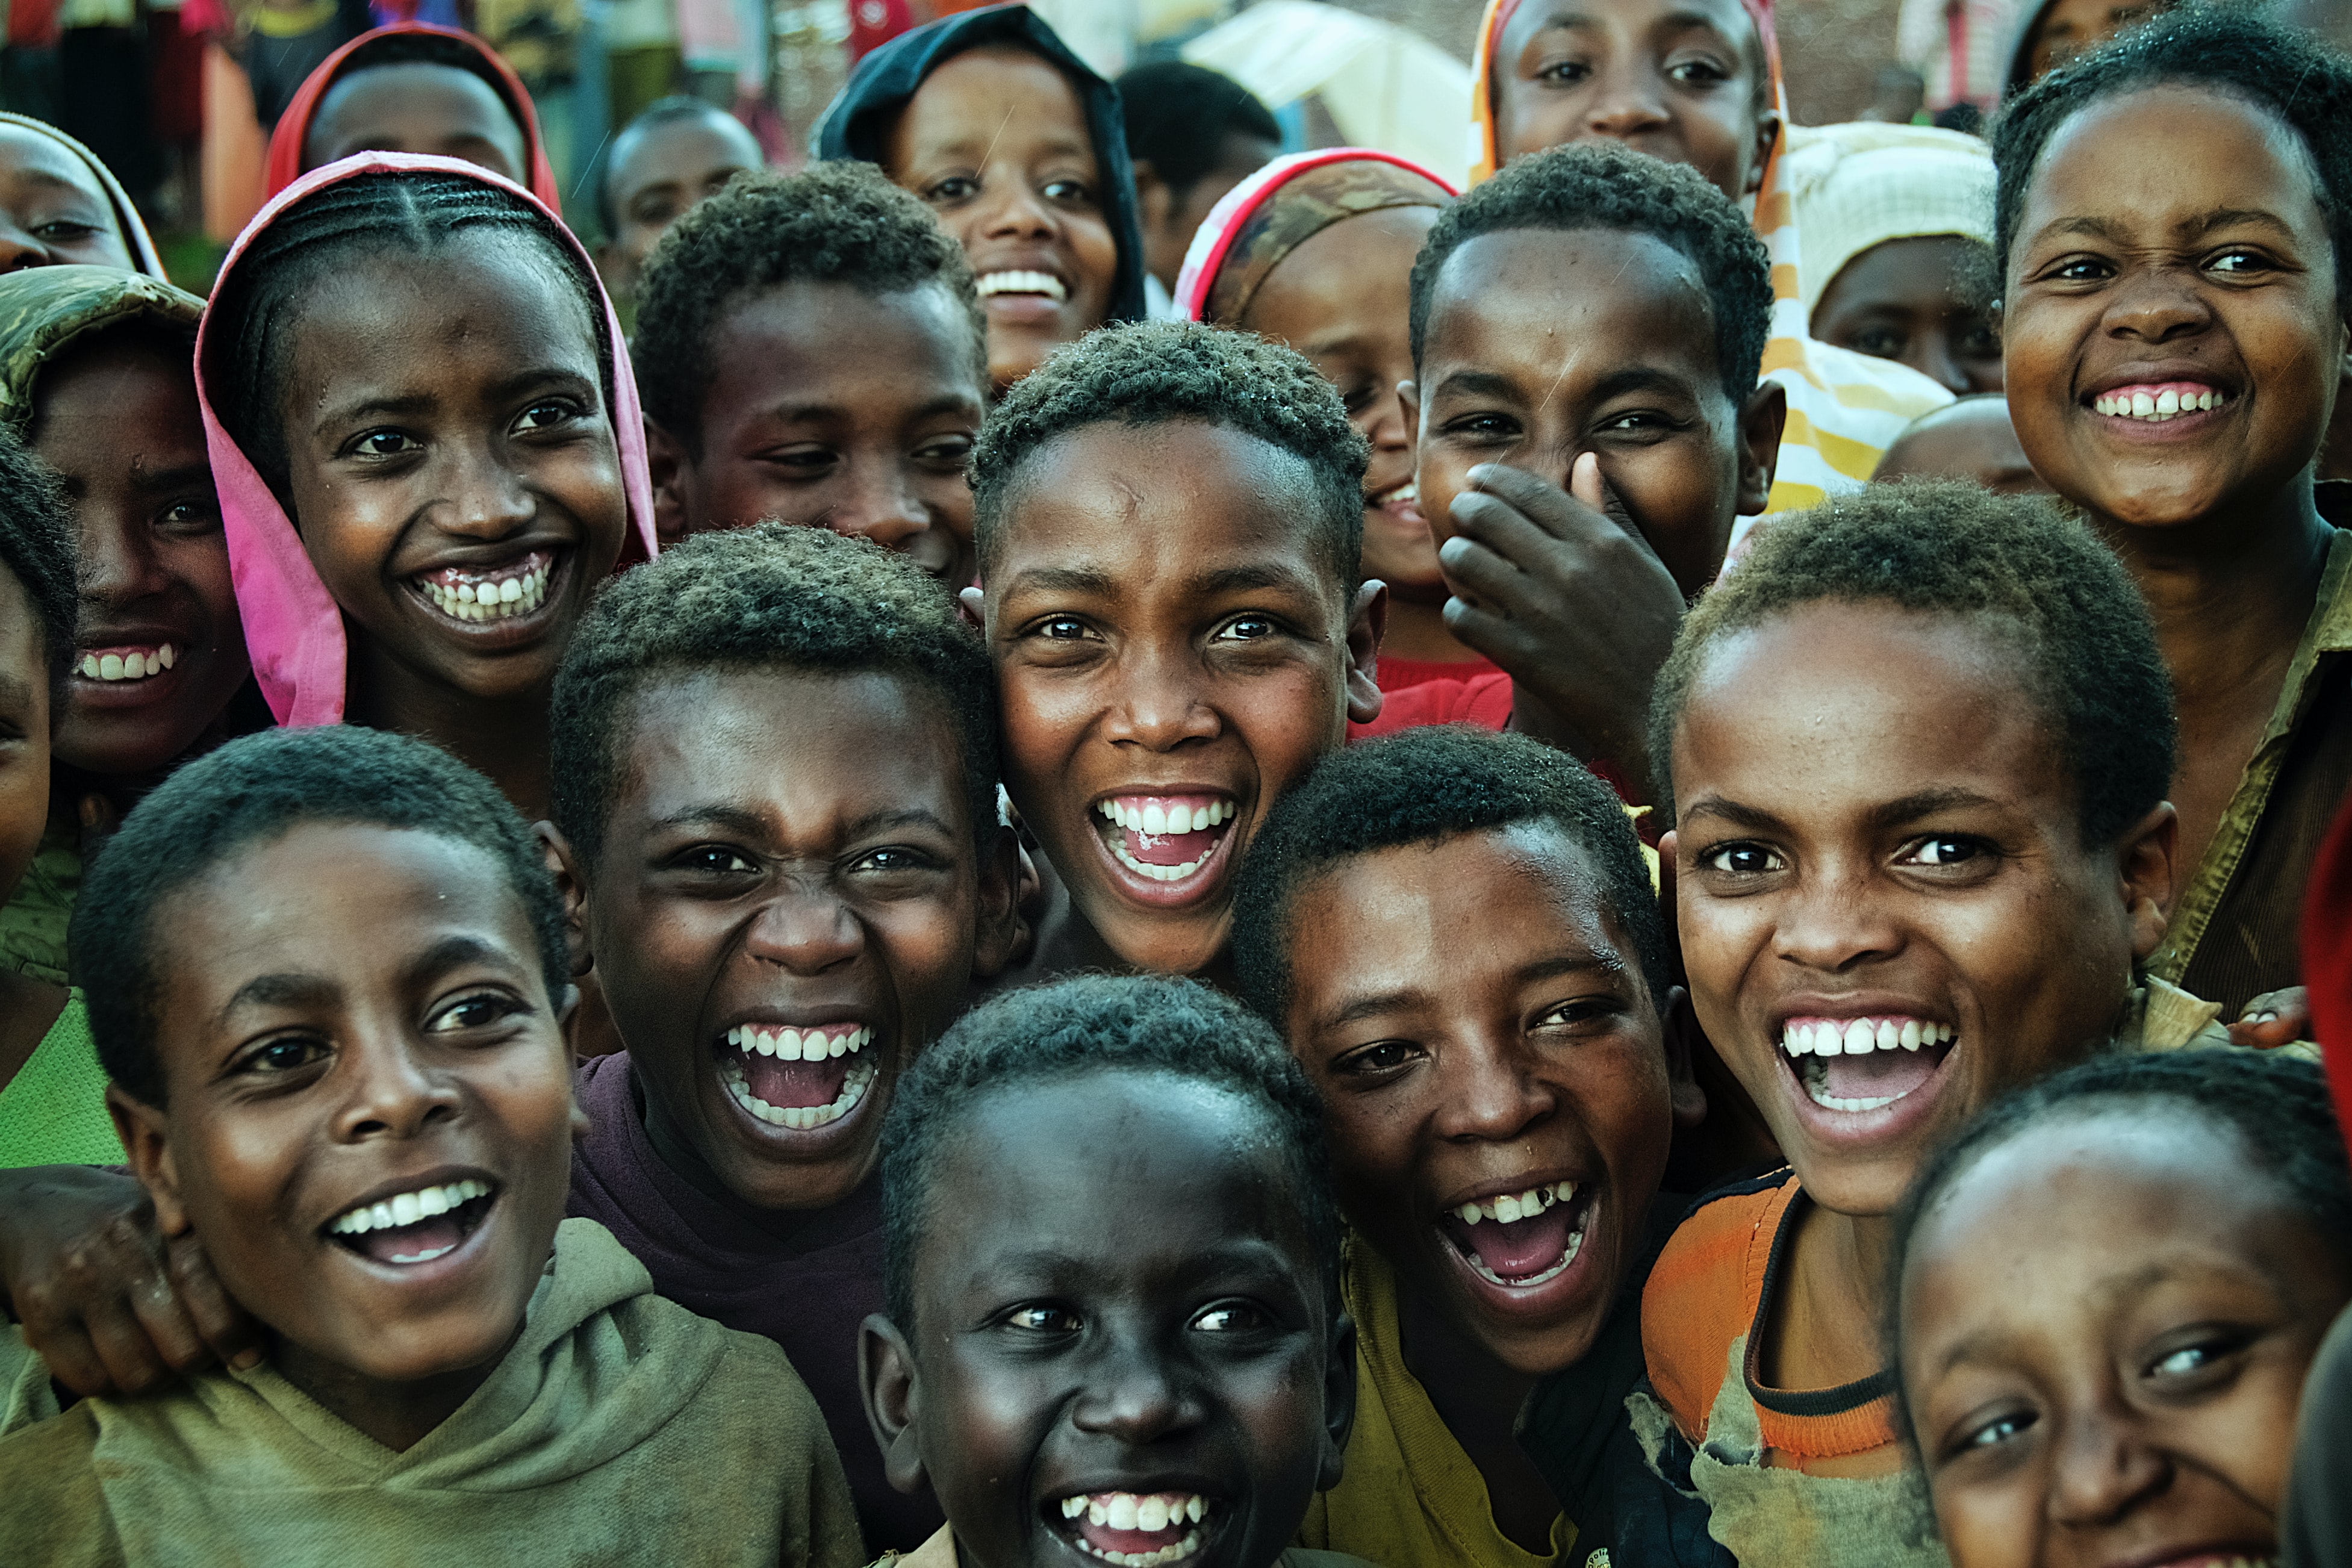 A group of children gathered together joyfully smile at the camera.